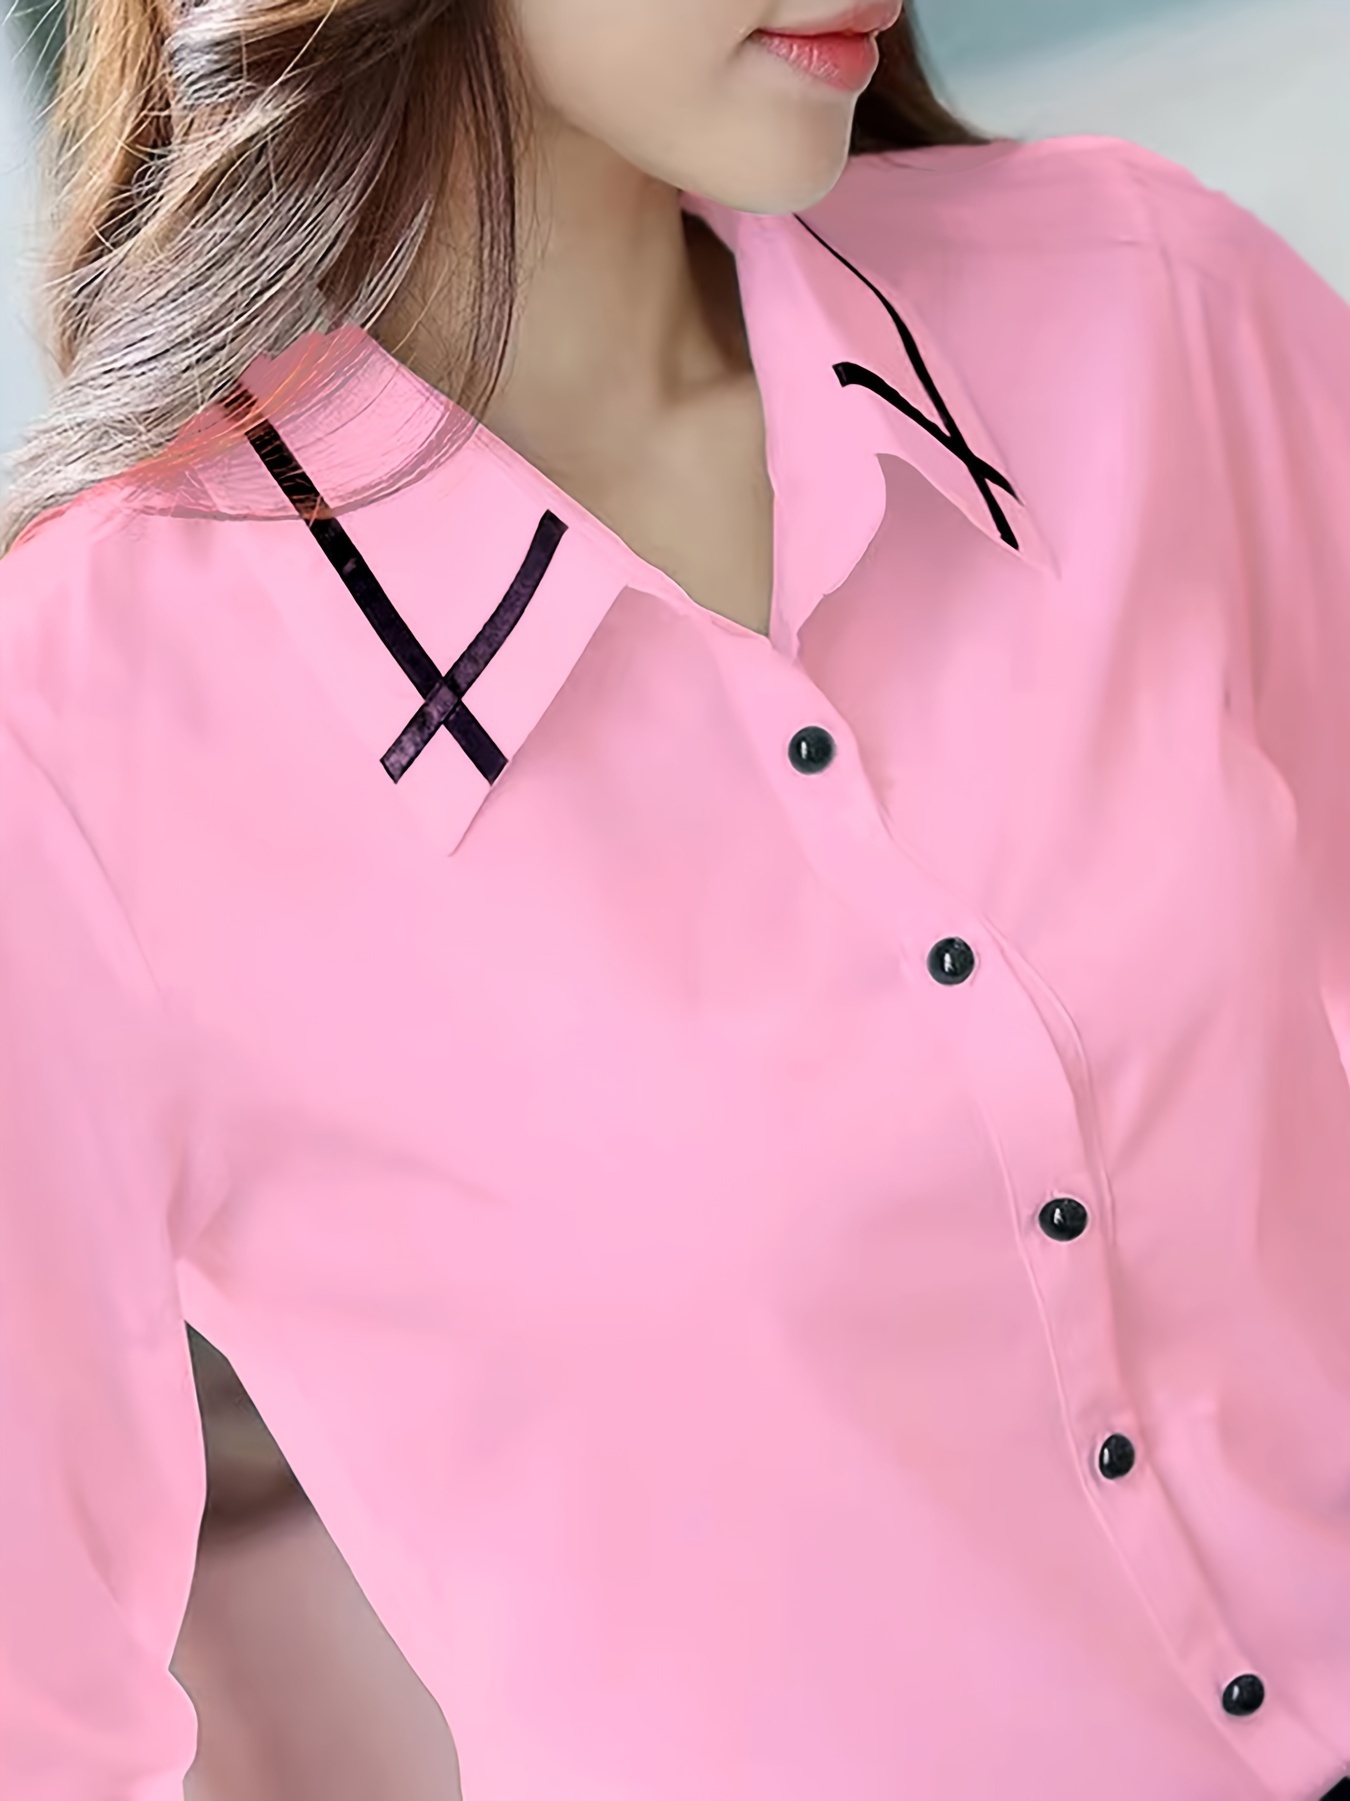 contrast trim button front shirt casual long sleeve shirt for spring fall womens clothing details 8